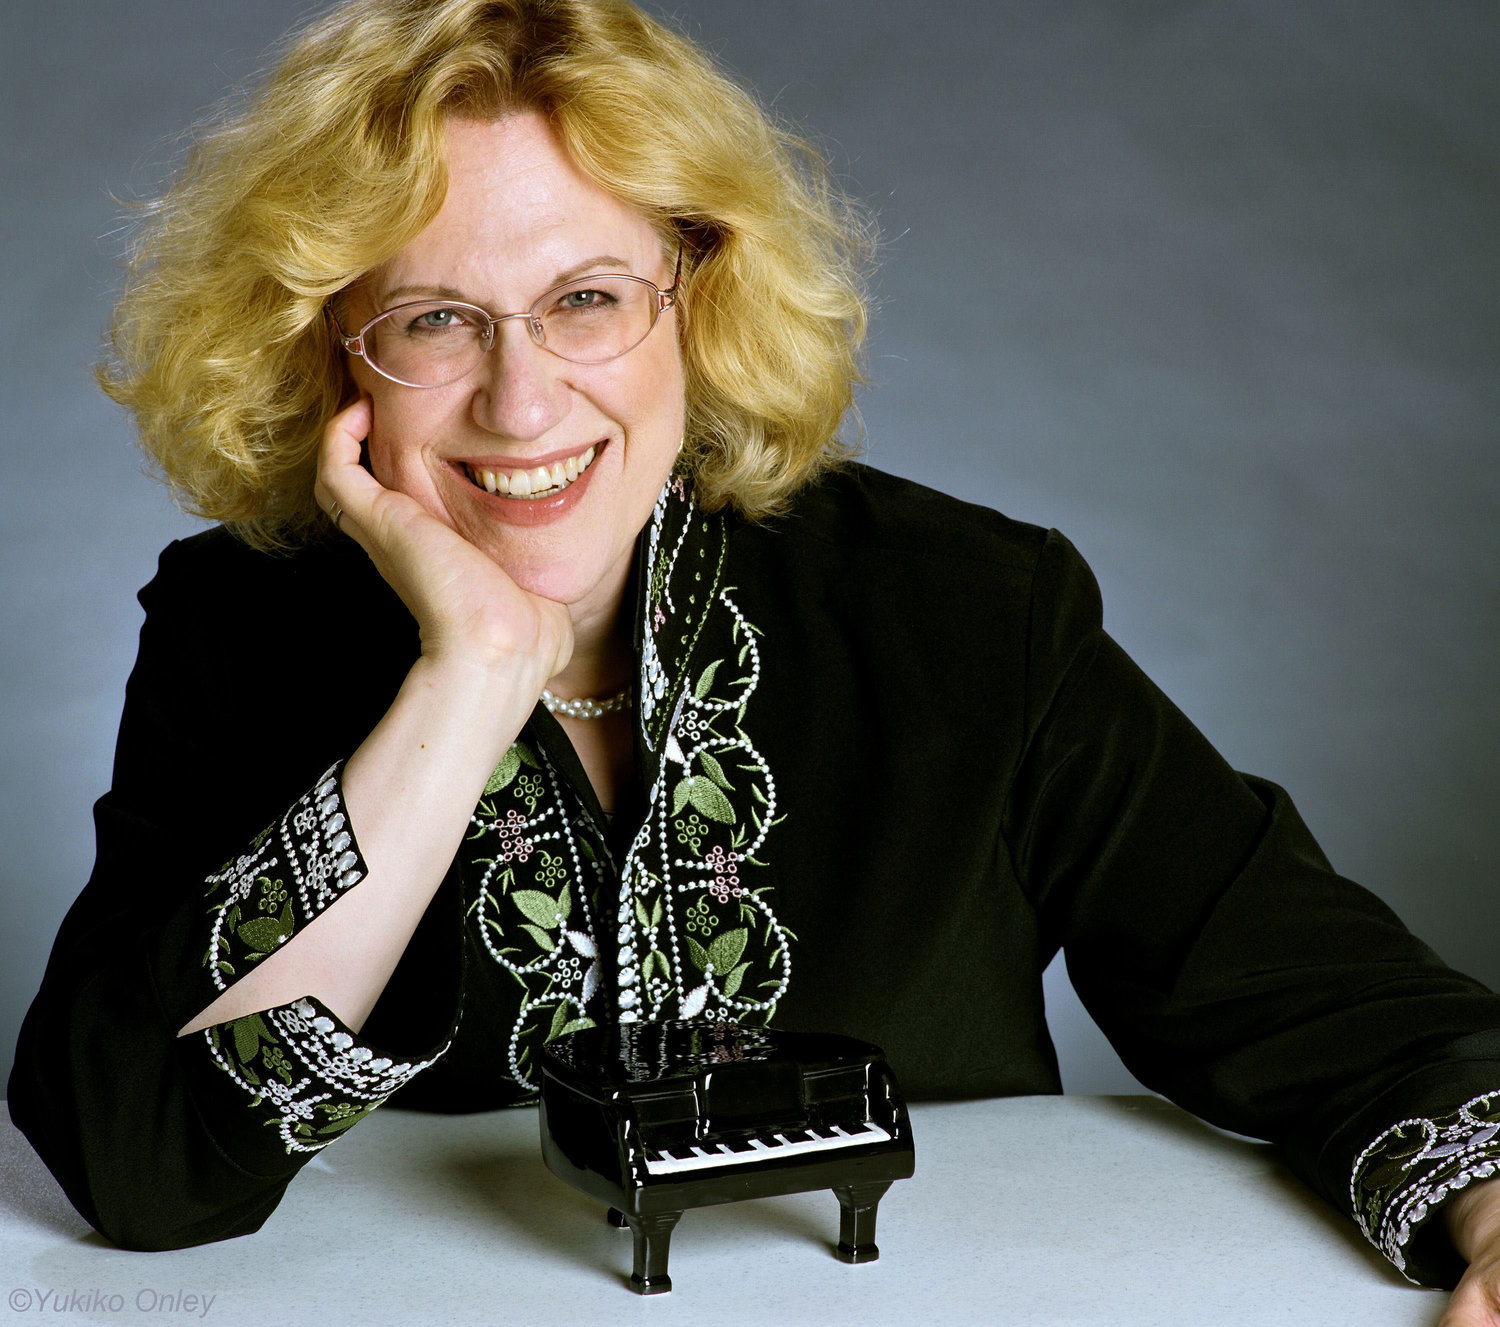 Noted for her musical command, cosmopolitan artistry and visionary independence, Sara Davis Buechner has been both a teacher and performer at Shandelee